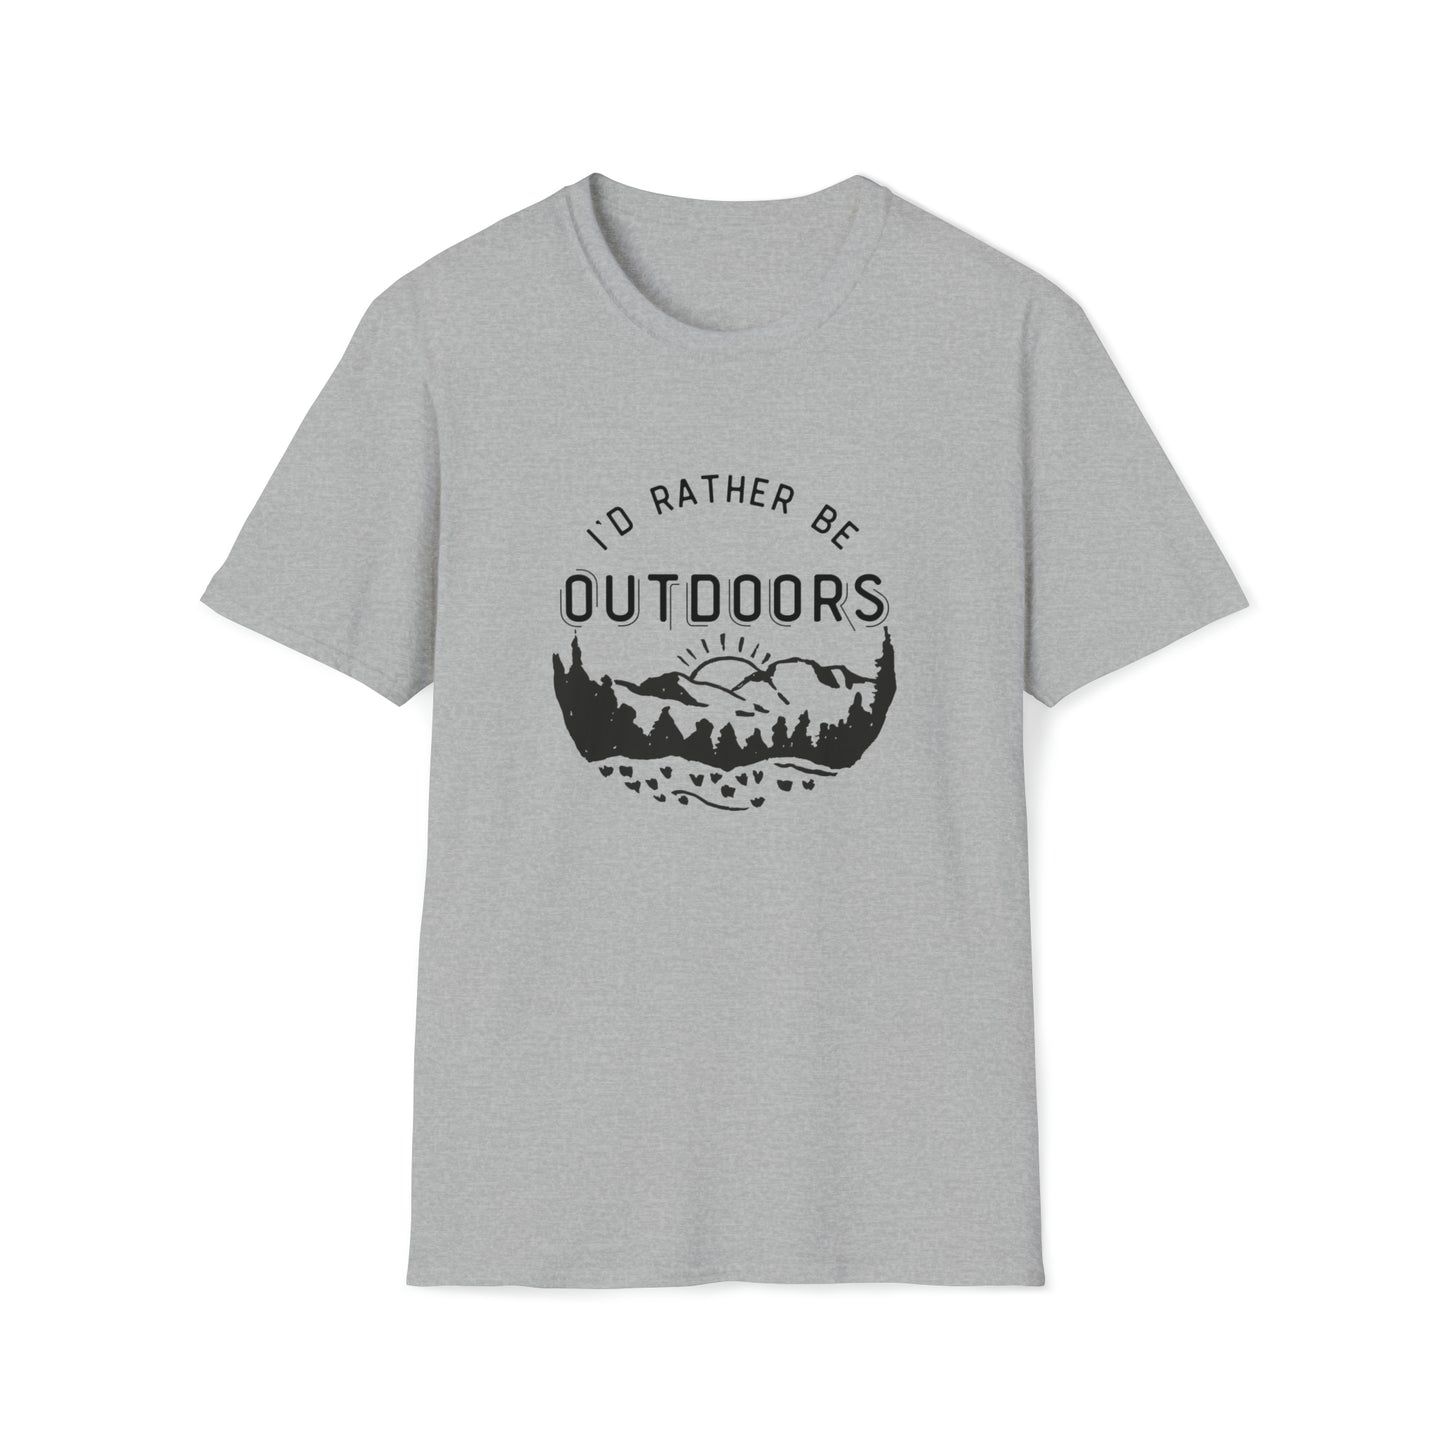 Unisex Softstyle T-Shirt, I'd Rather Be Outdoors